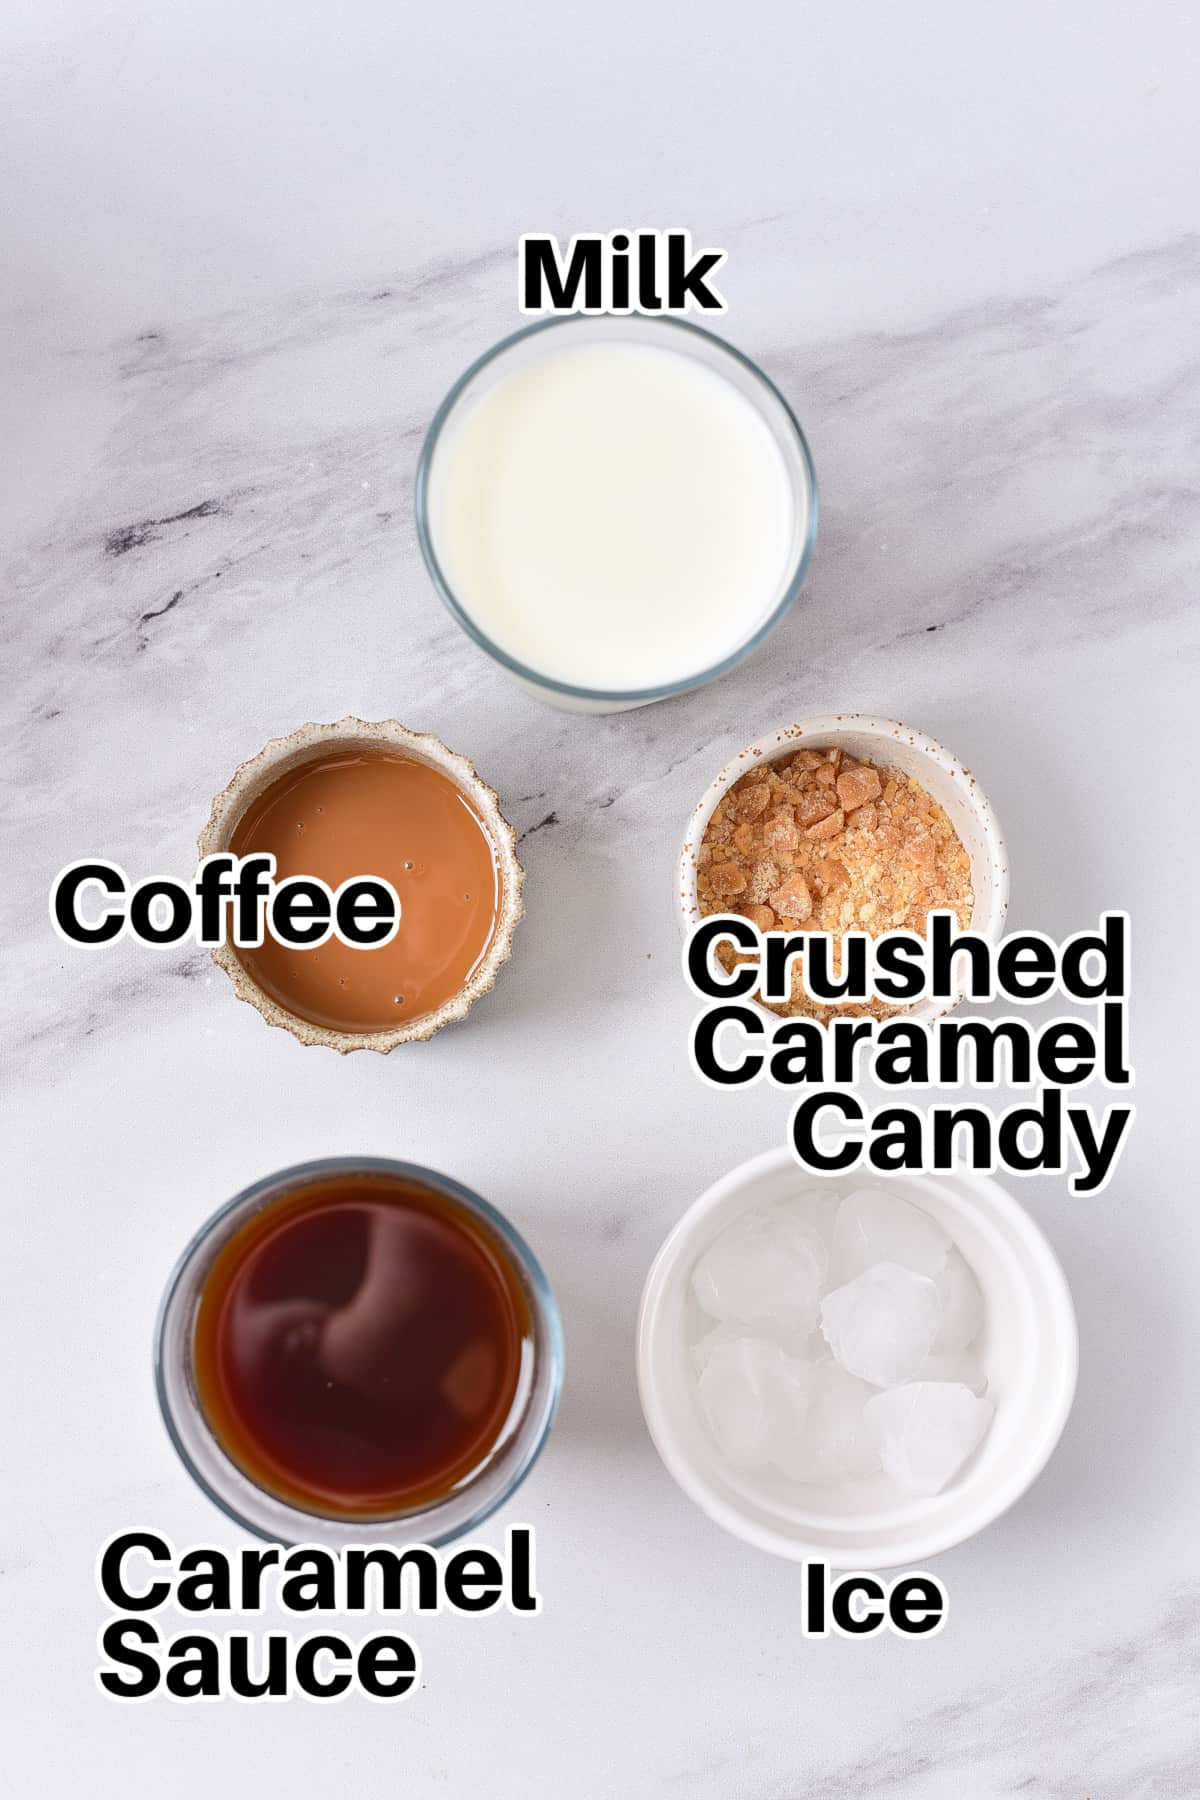 Ingredients on a table: milk, crushed caramels, coffee, caramel sauce and ice.